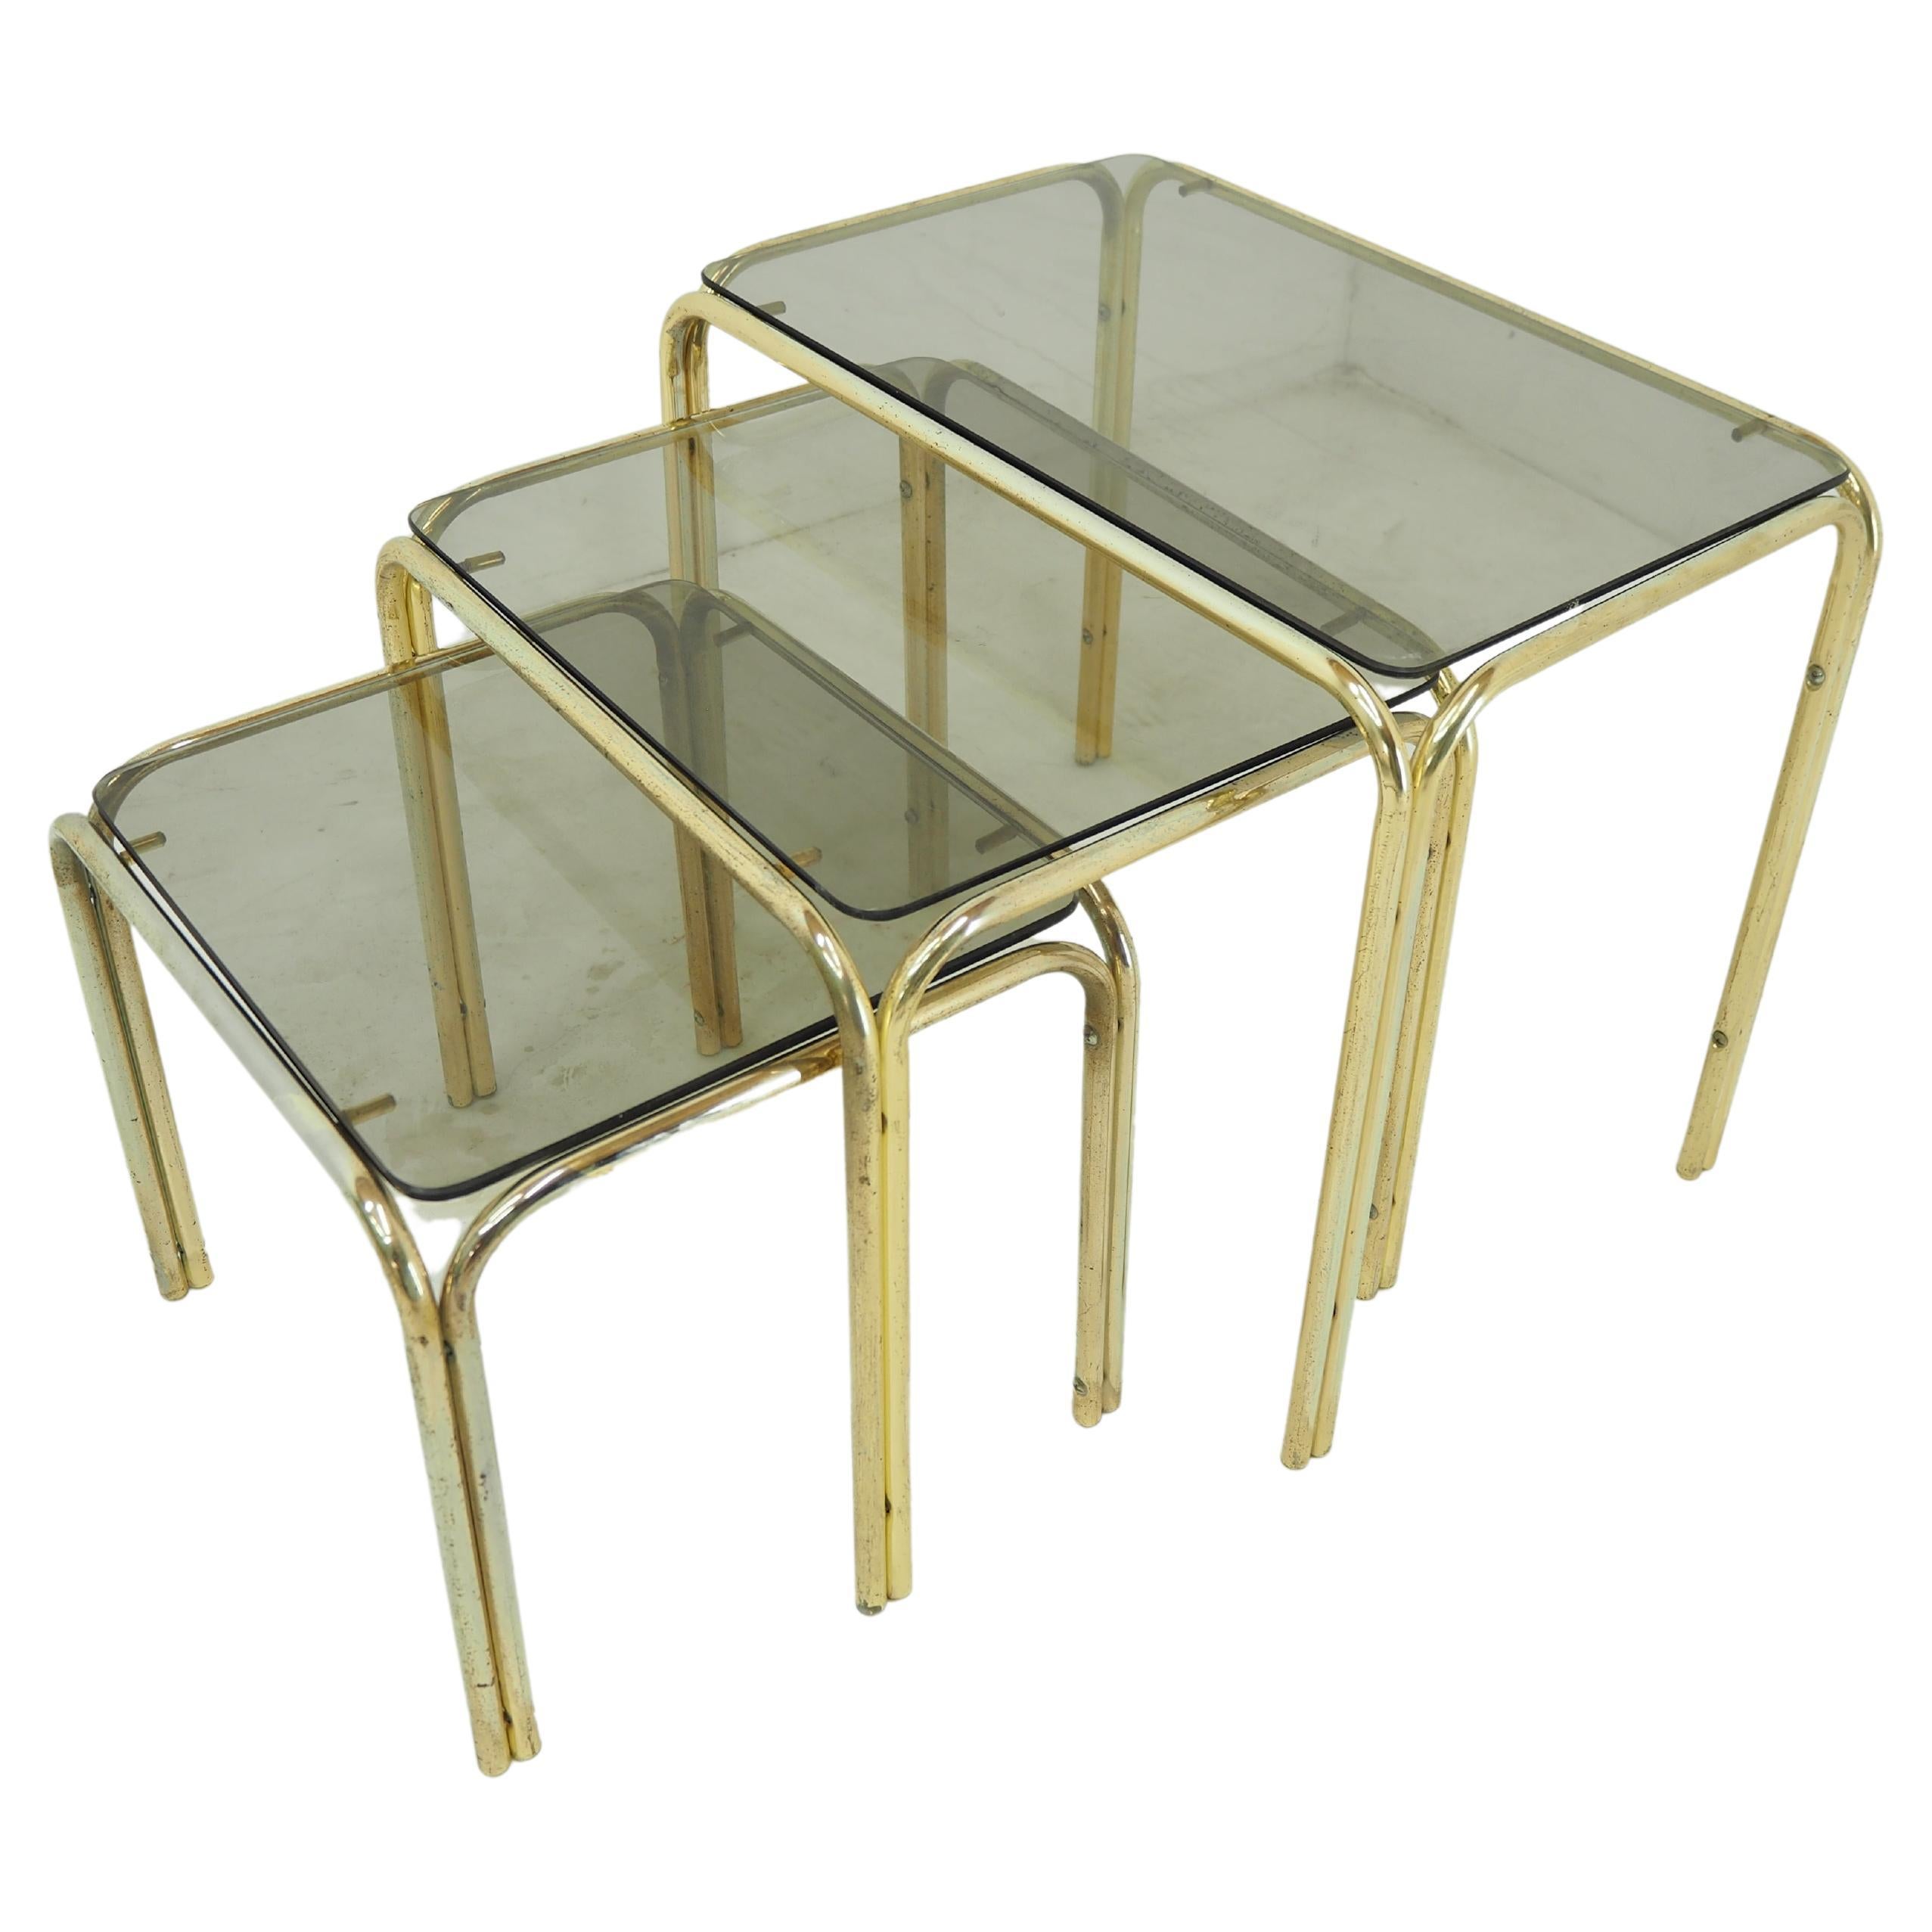 Midcentury Brass & Smoked Glass Nesting Tables, 1970s For Sale